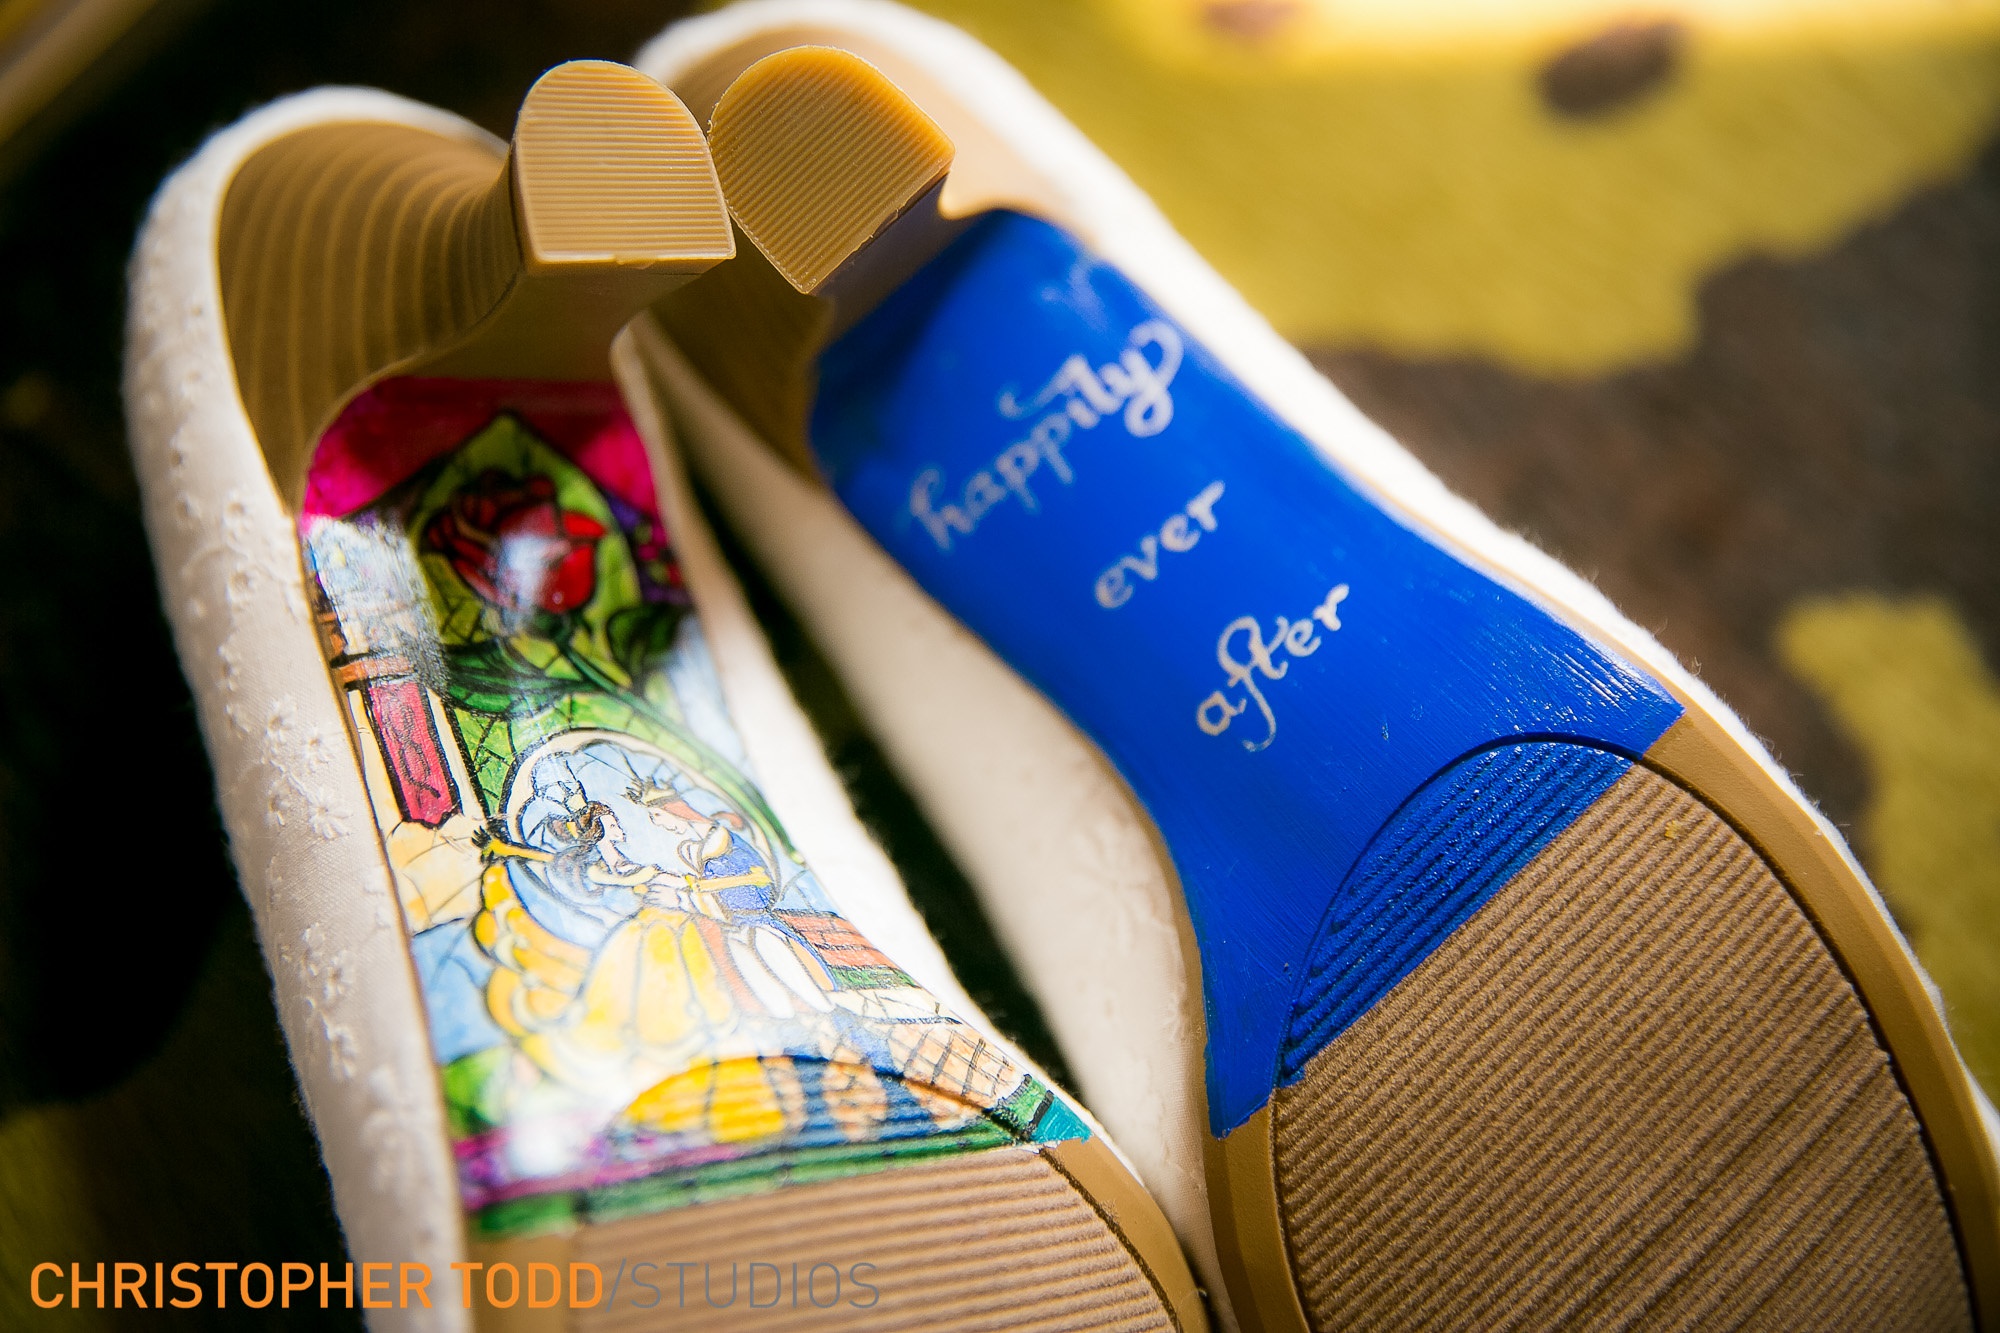 Bridal shoes with custom painting on the soles